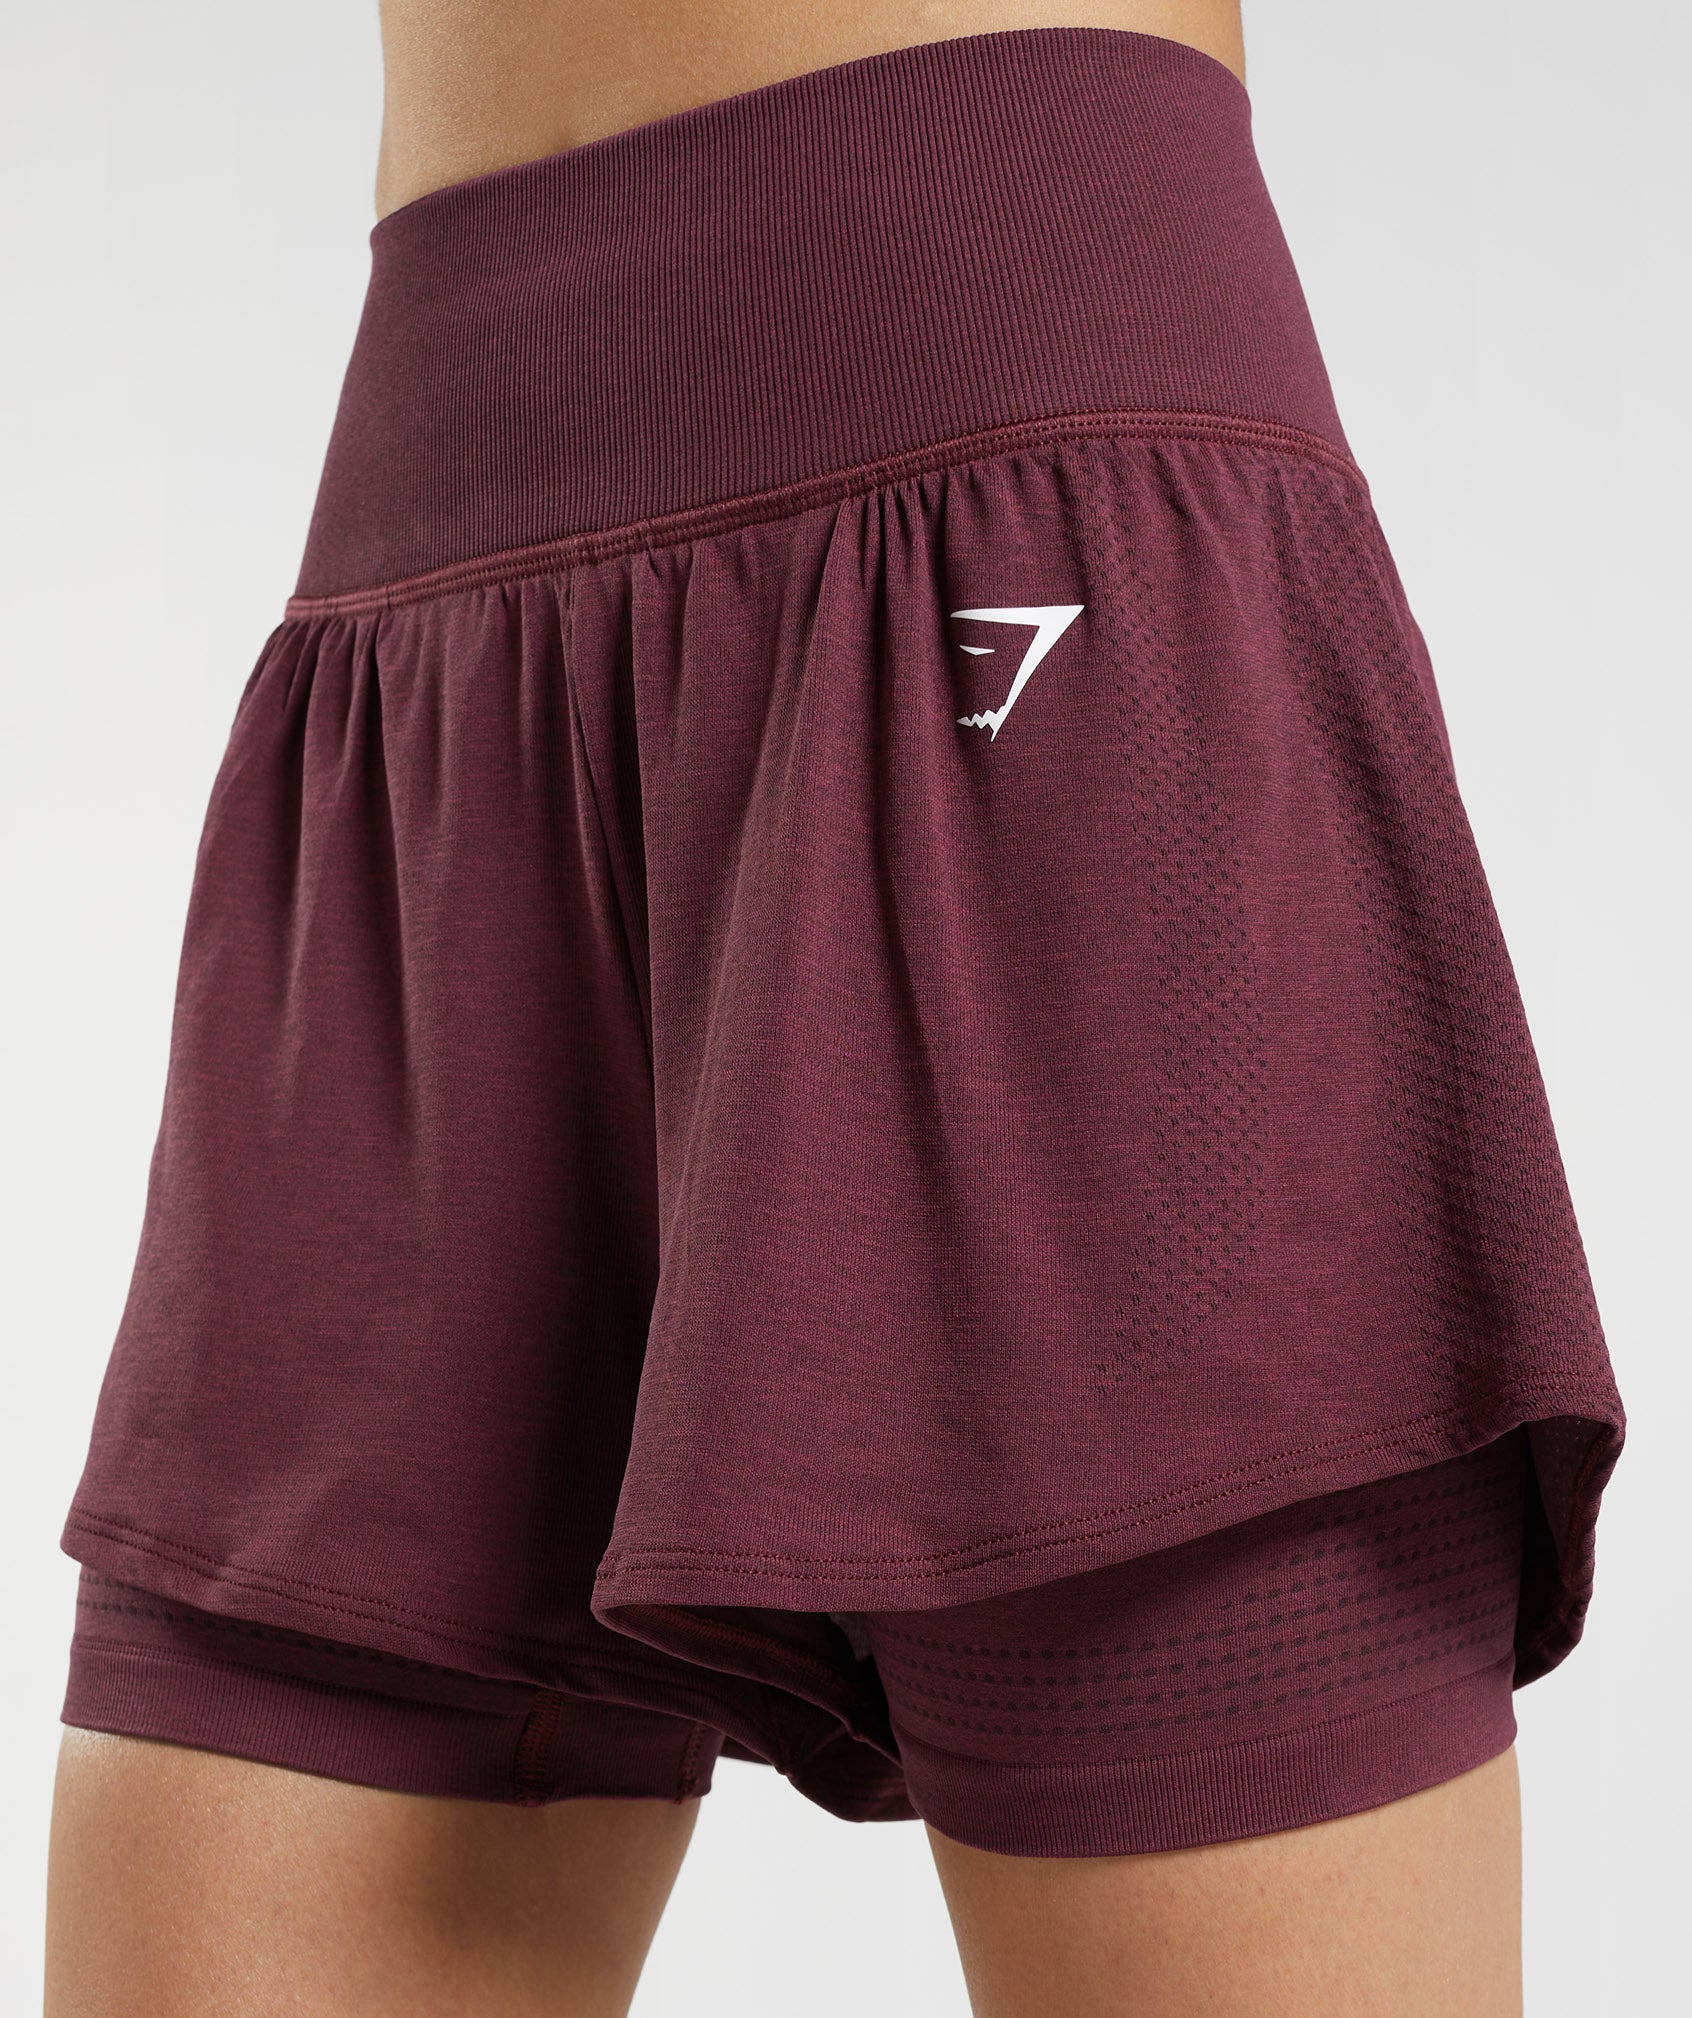 Vital Seamless 2.0 2-in-1 Shorts in Baked Maroon Marl - view 6